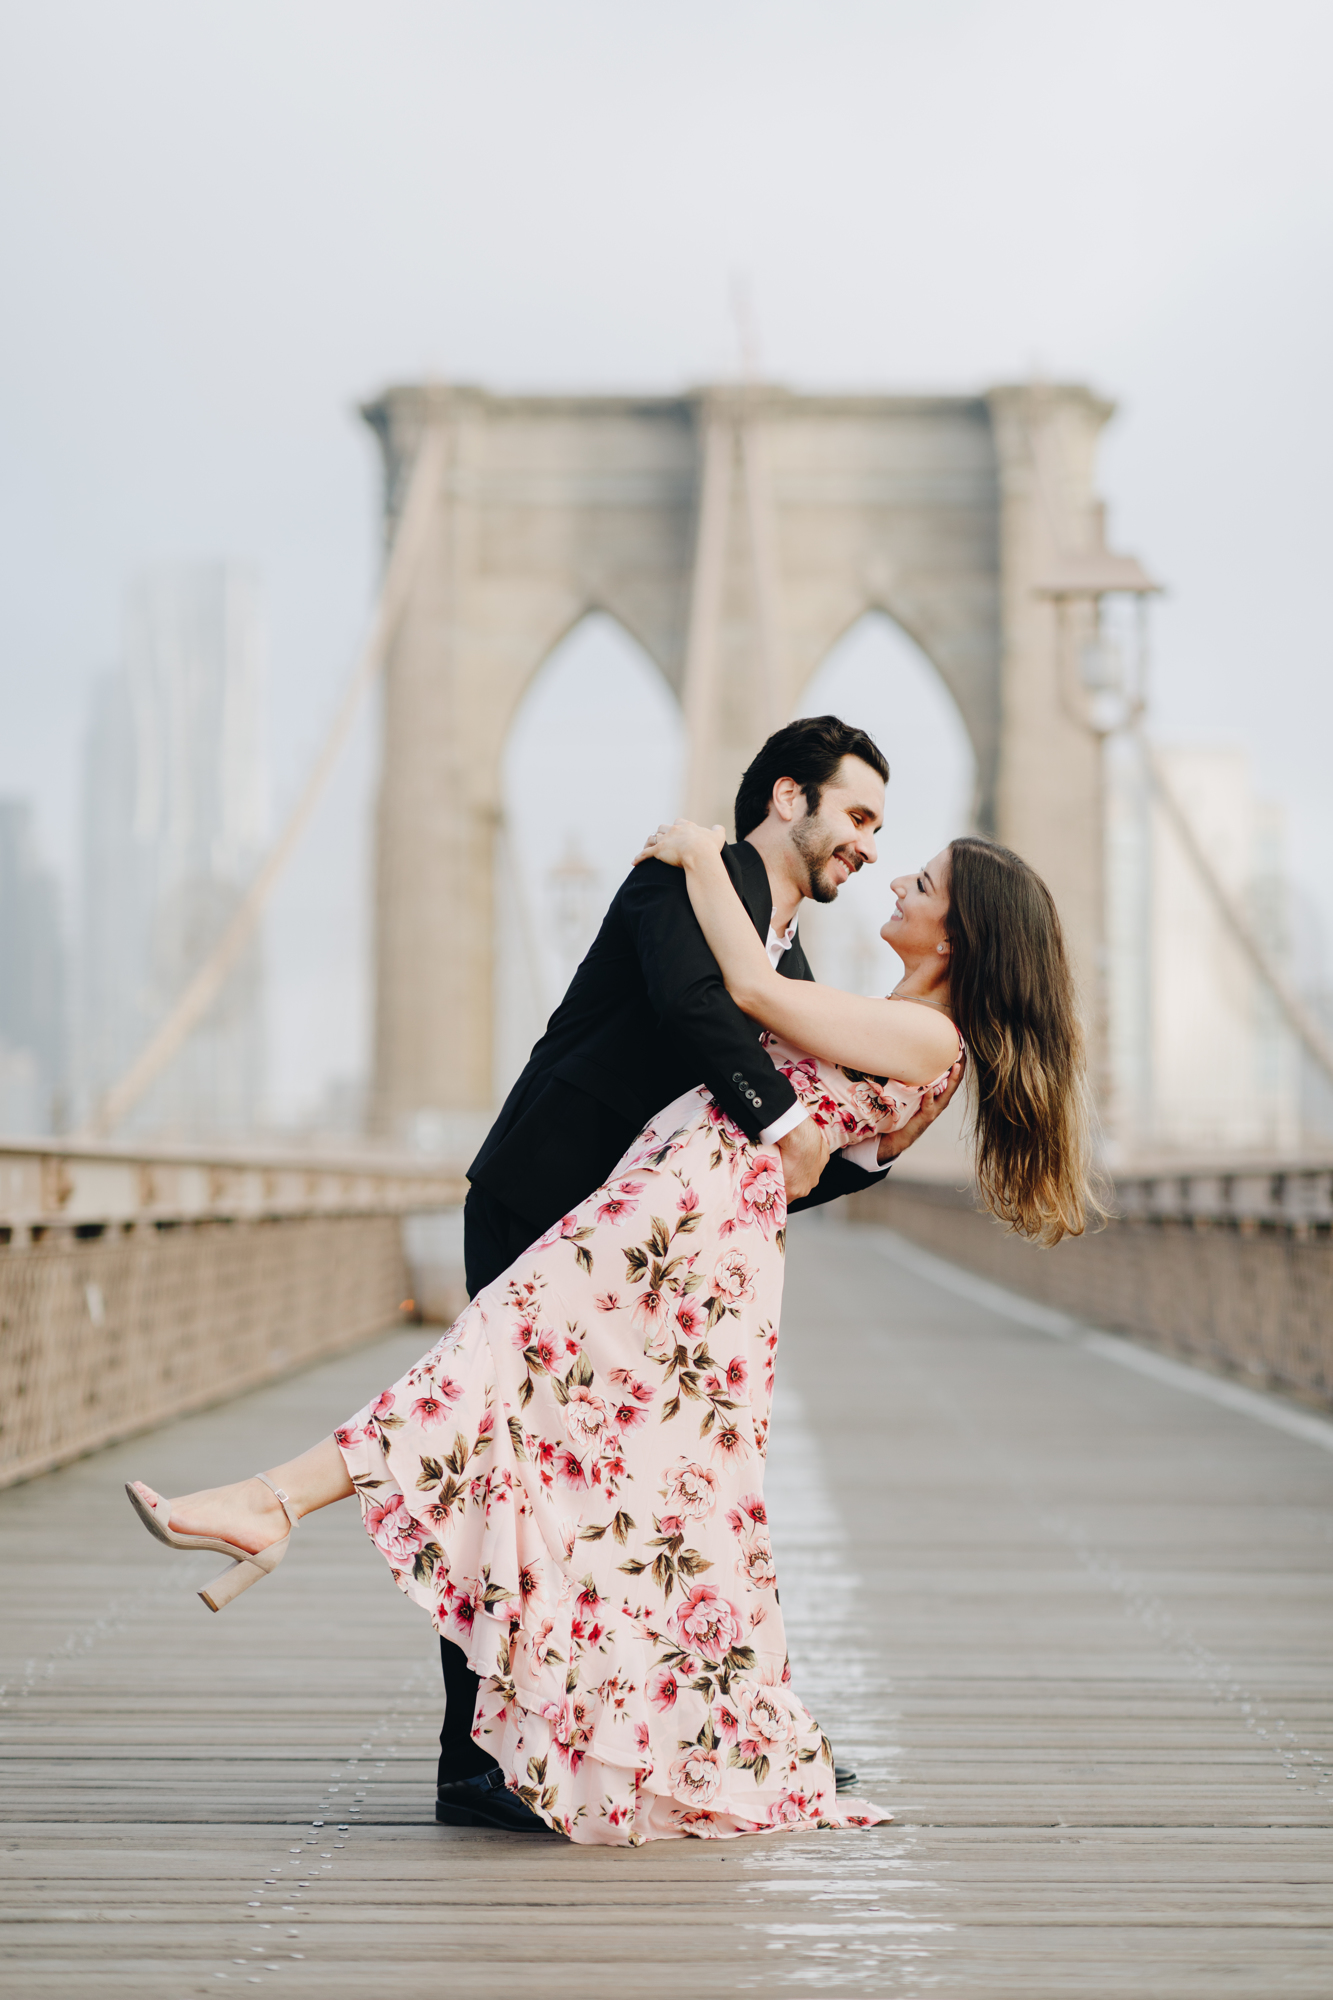 Stylish New York Engagement Photography with Spring Blossoms